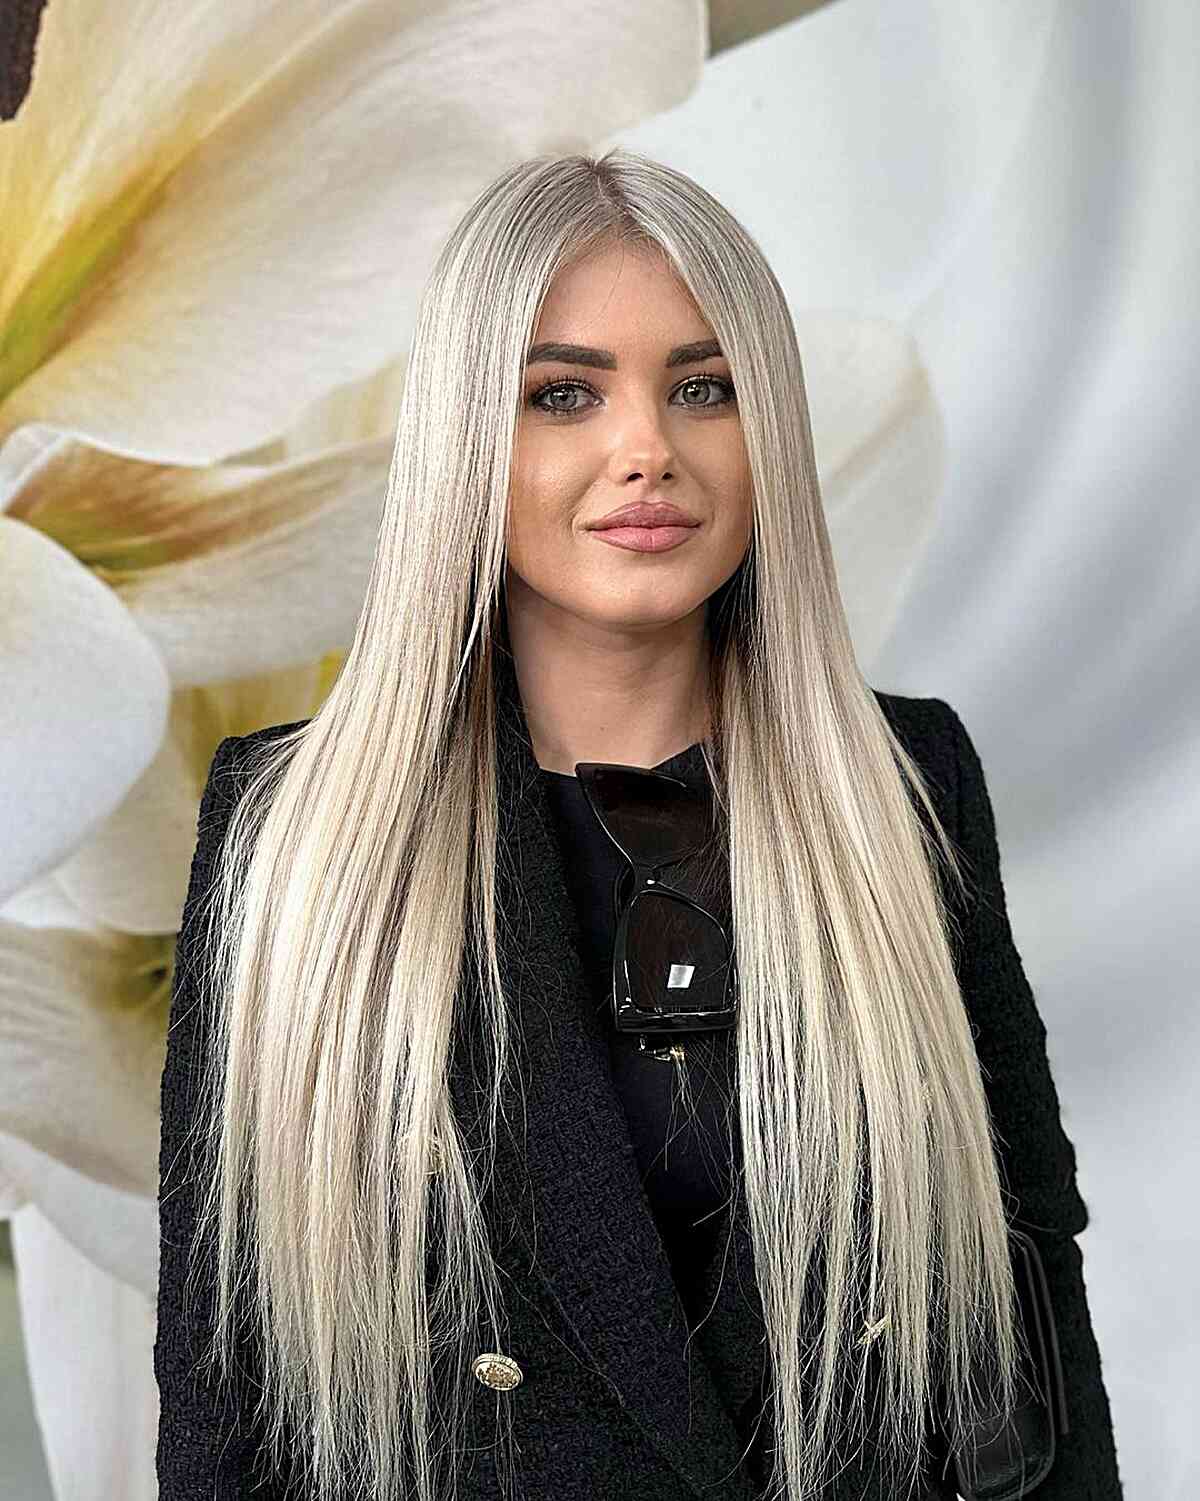 The Longest and Straightest Hair for women with long blonde stick straight hair